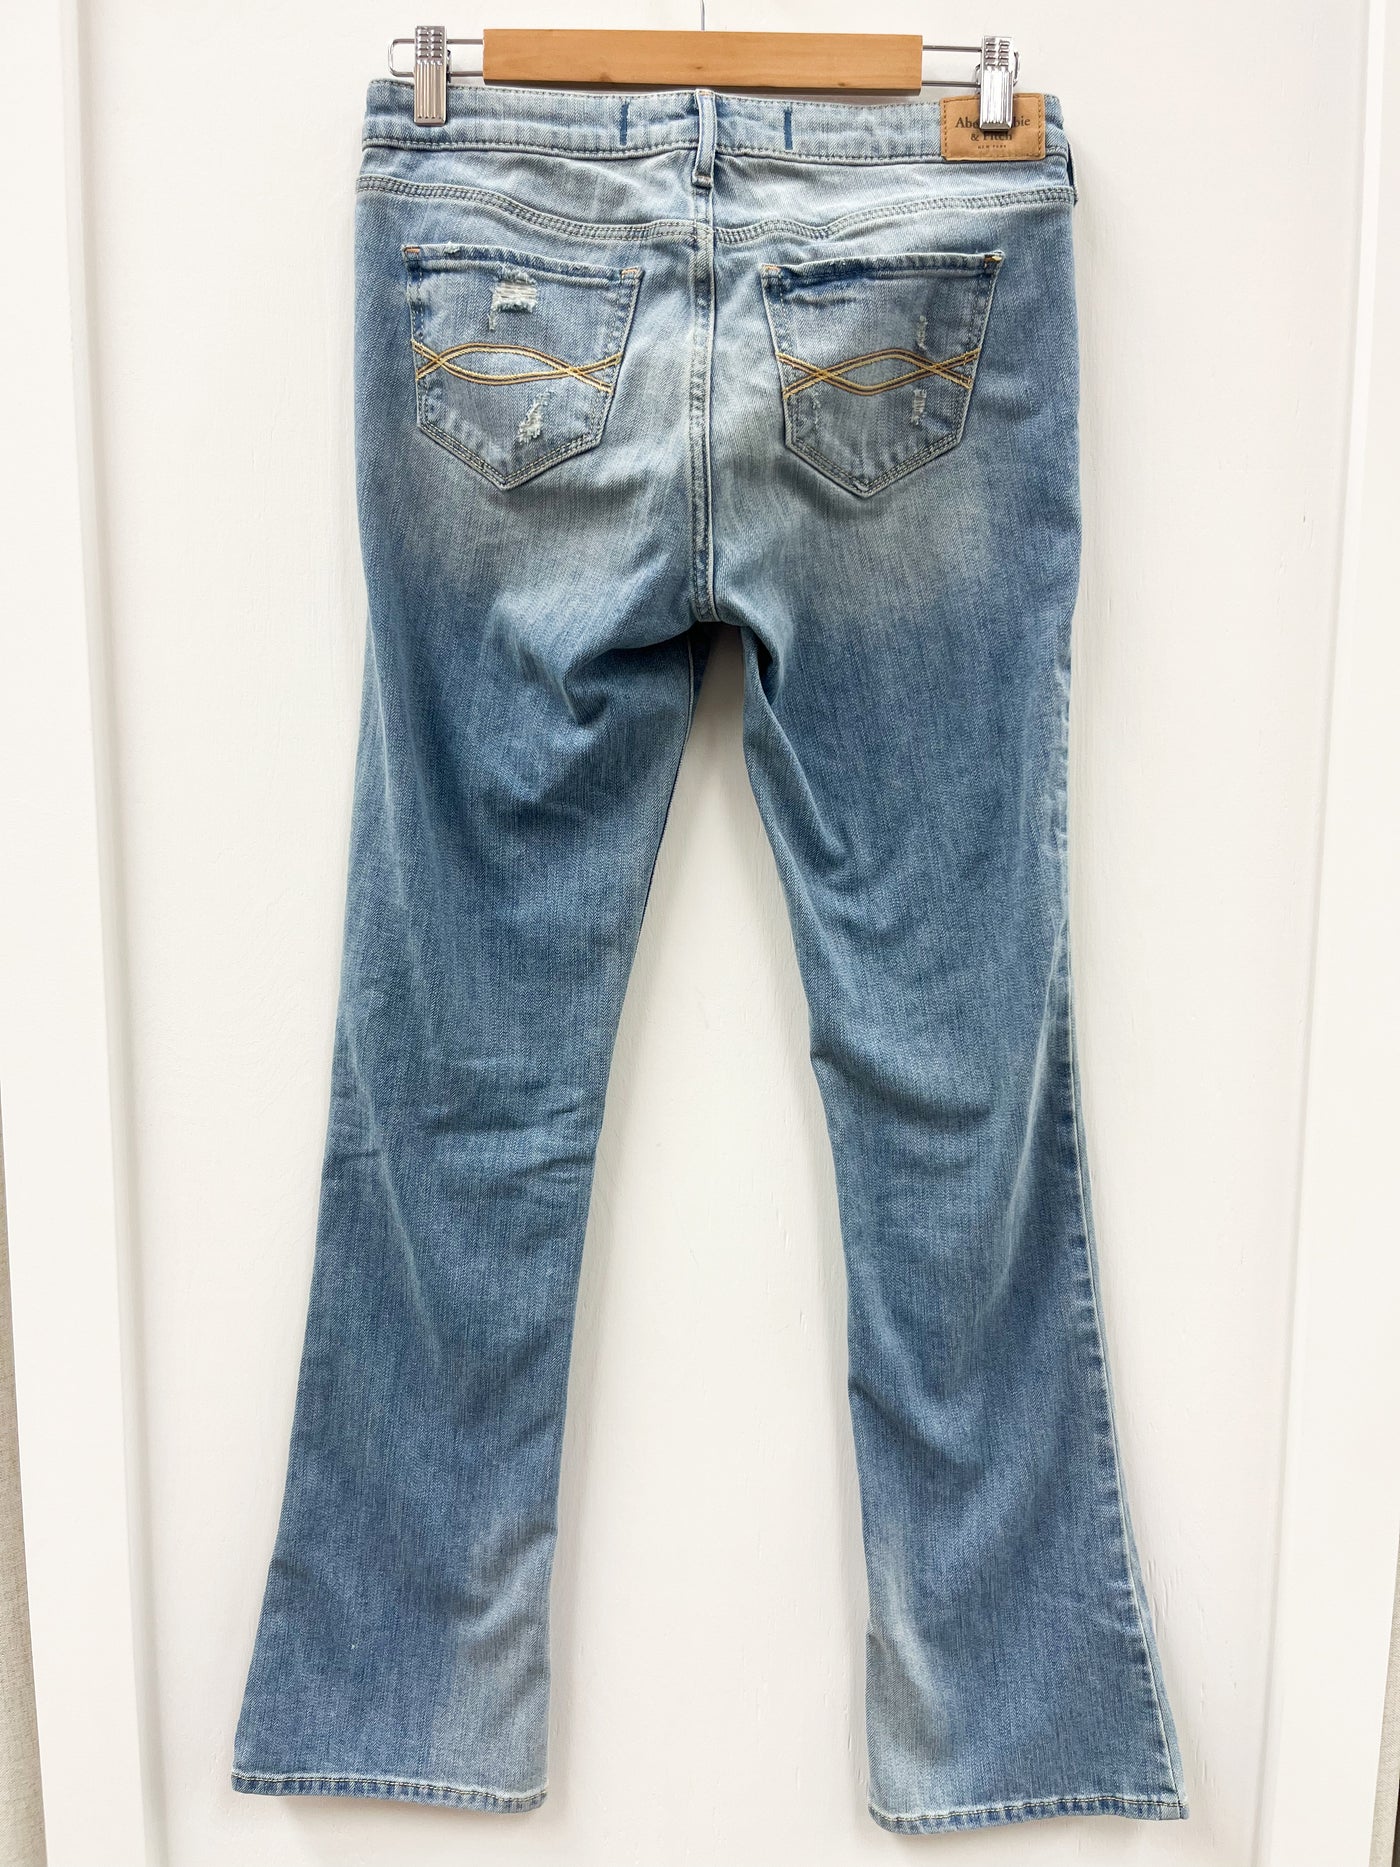 Abercrombie & fitch jeans